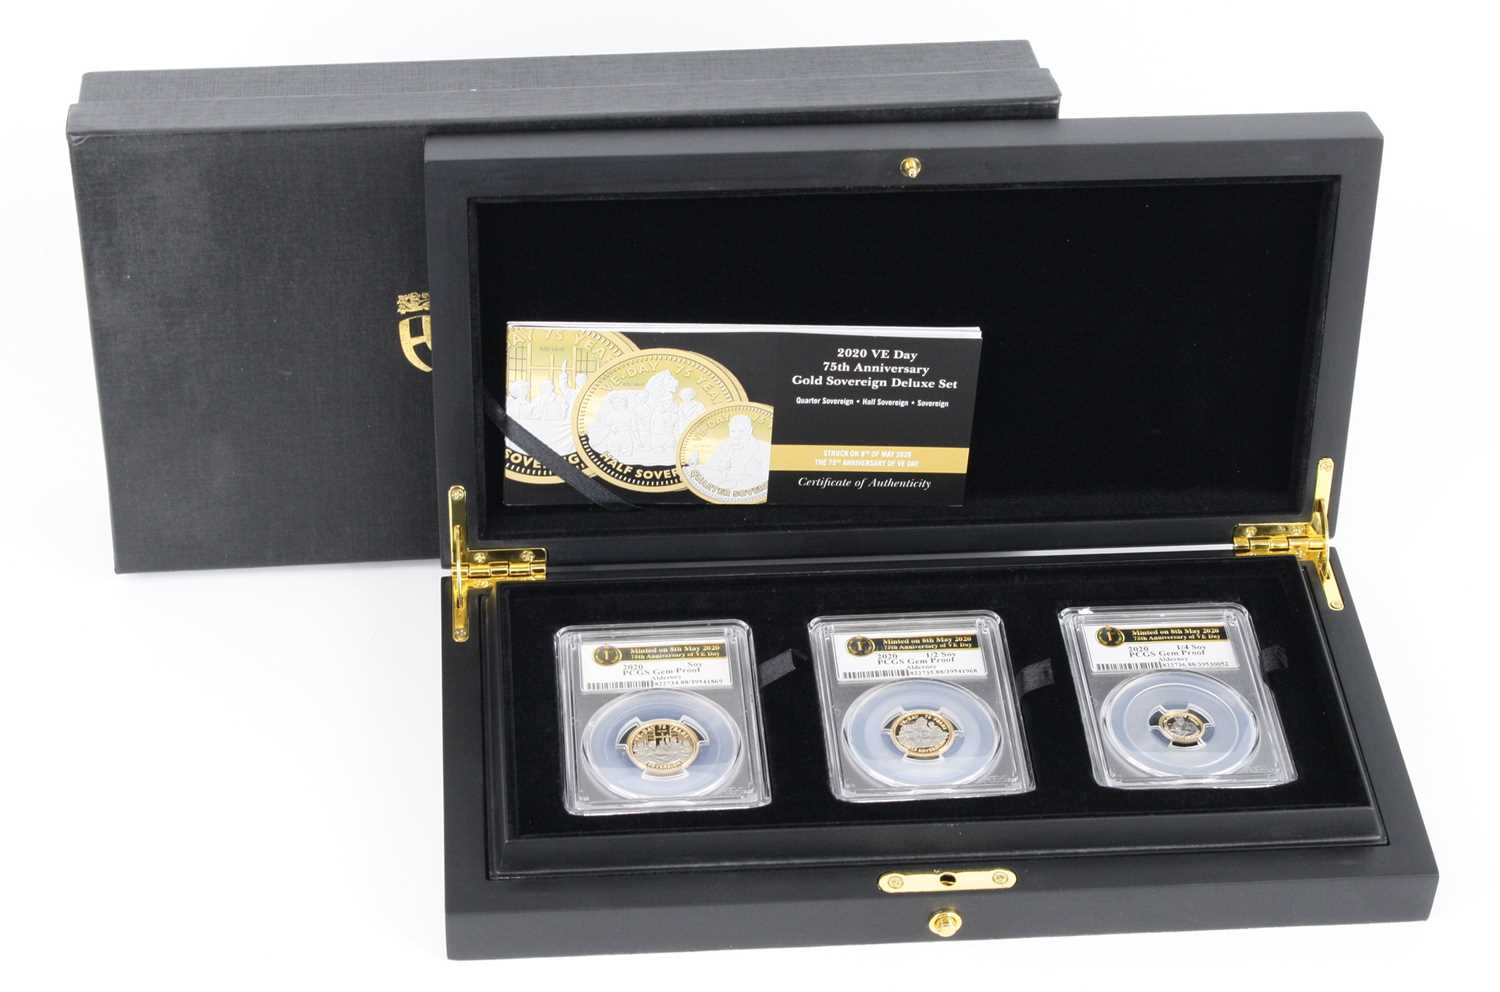 Alderney, 2020 VE Day 75th Anniversary Gold Sovereign Deluxe Set, to include full, half and